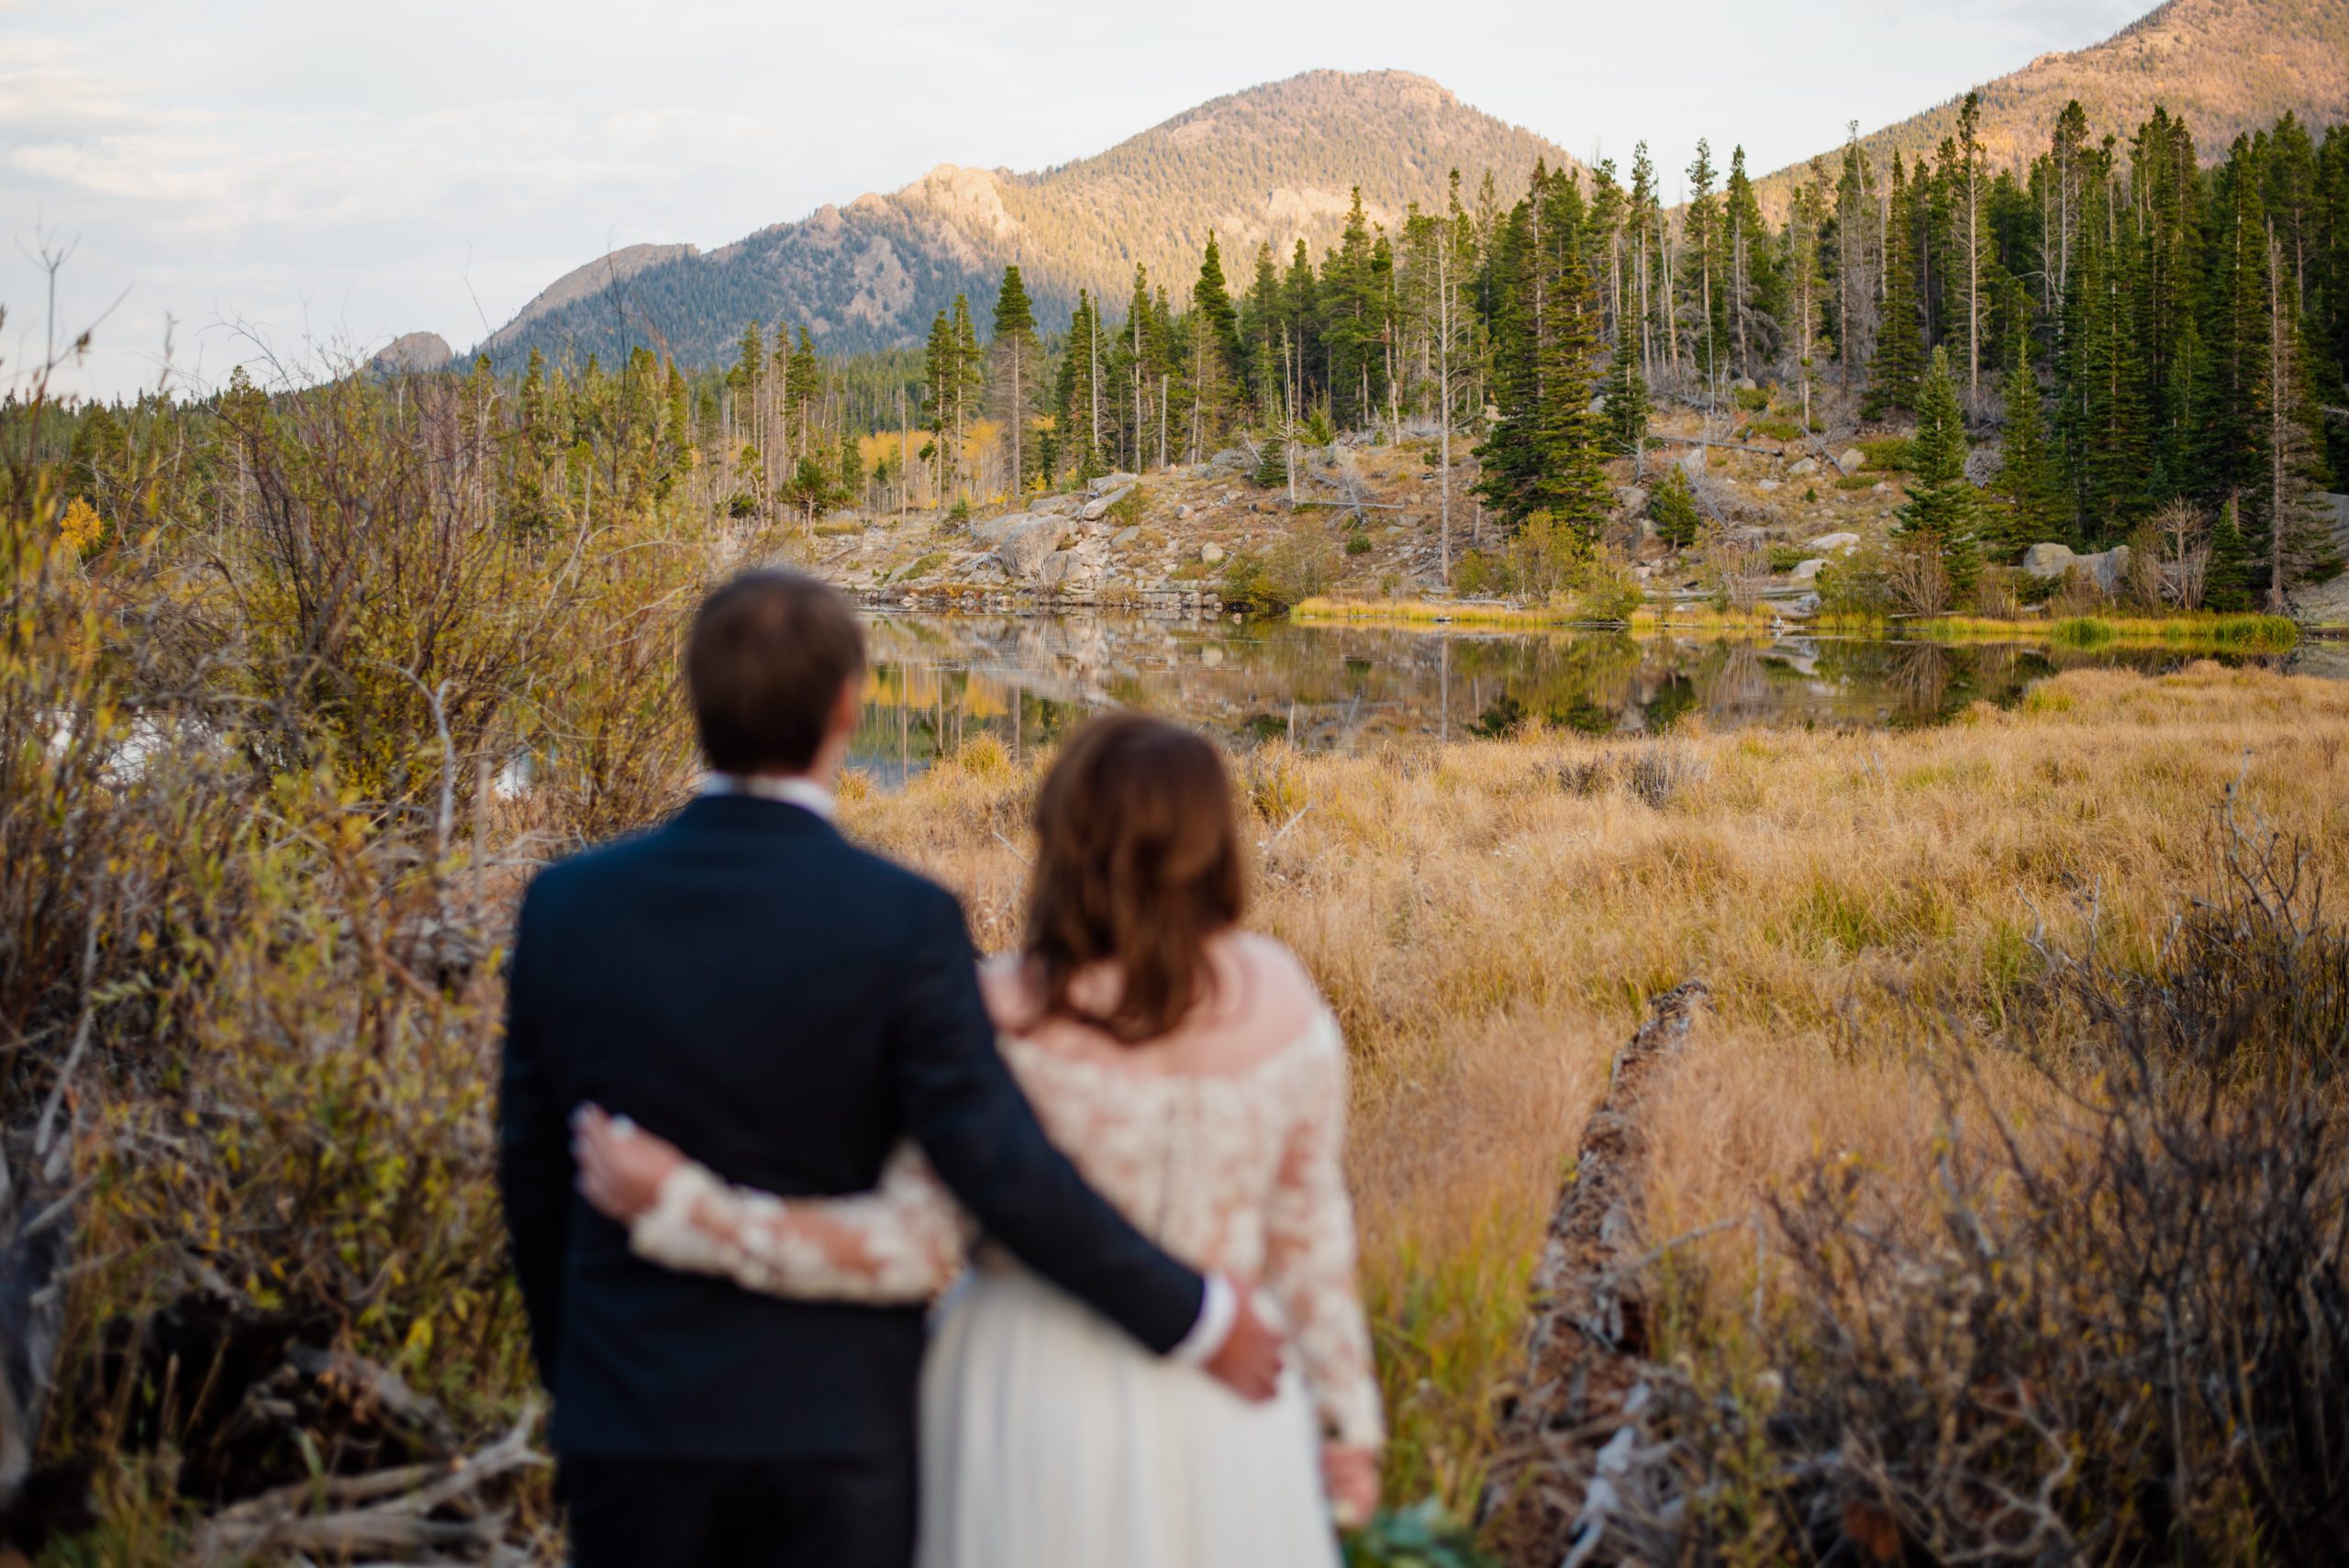 Bride and groom holding each others sides appreciation the beautiful landscape at Sprague Lake - RMNP